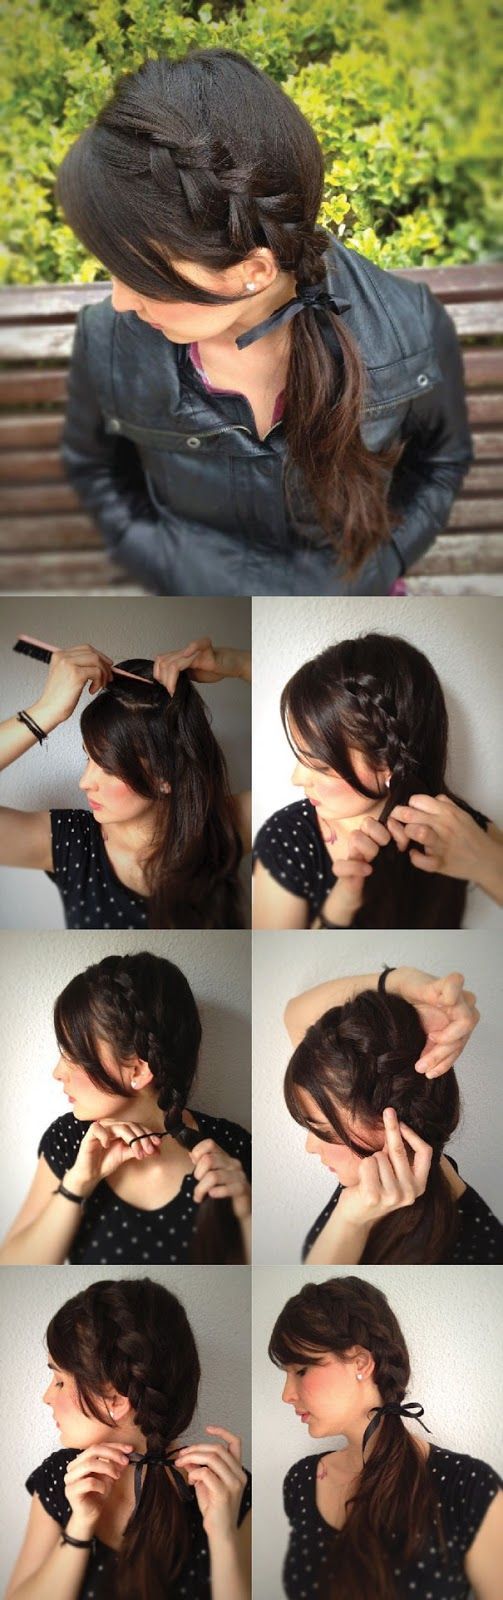 How To Make Beautiful Side Braid | hairstyles tutorial